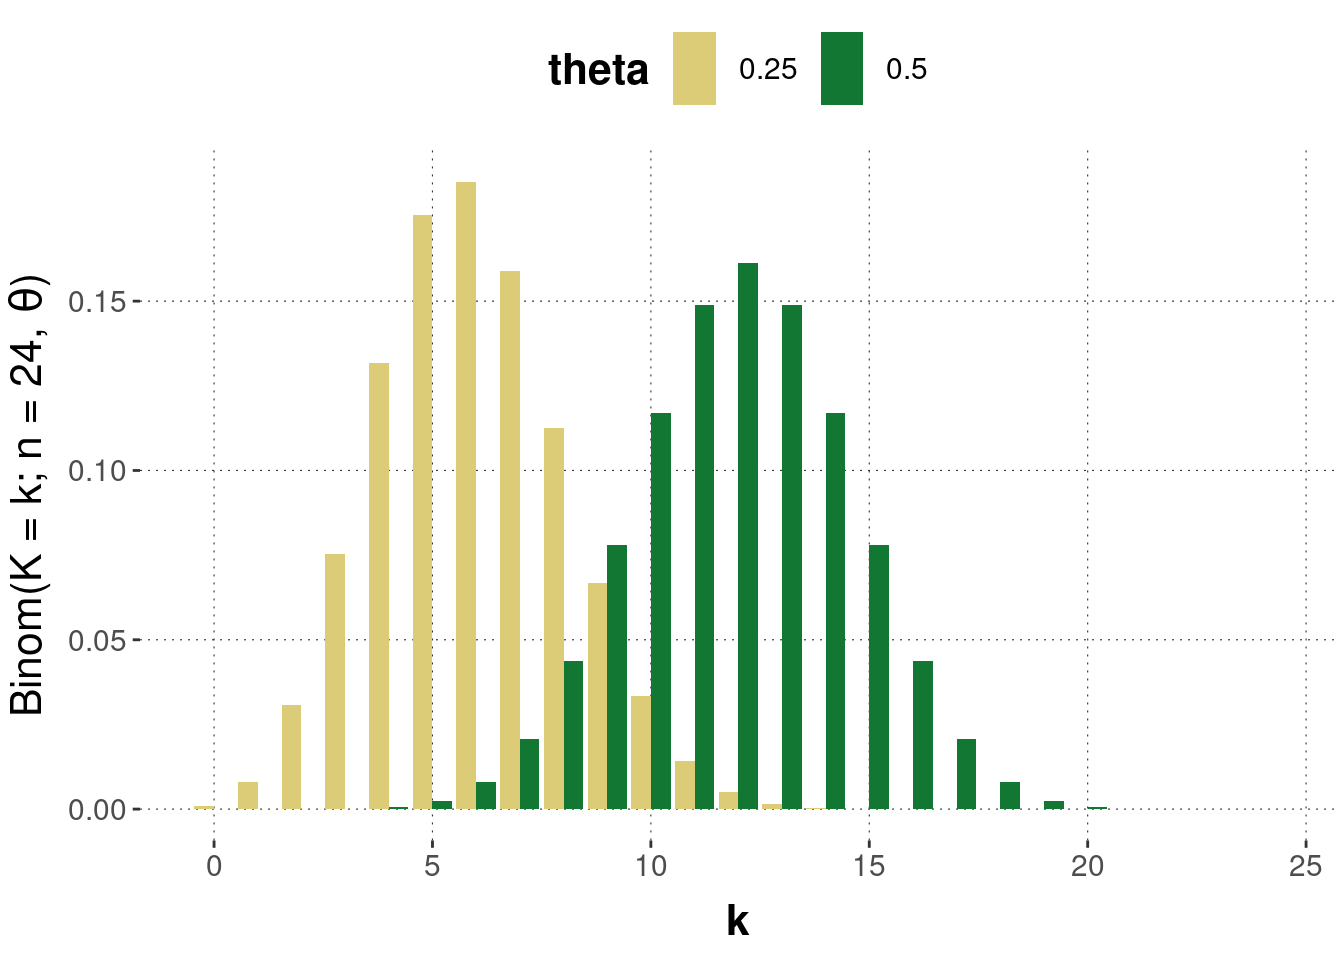 Examples of the Binomial distribution. The $y$-axis gives the probability of seeing $k$ heads when flipping a coin $n=24$ times with a bias of either $\theta = 0.25$ or $\theta = 0.5$.